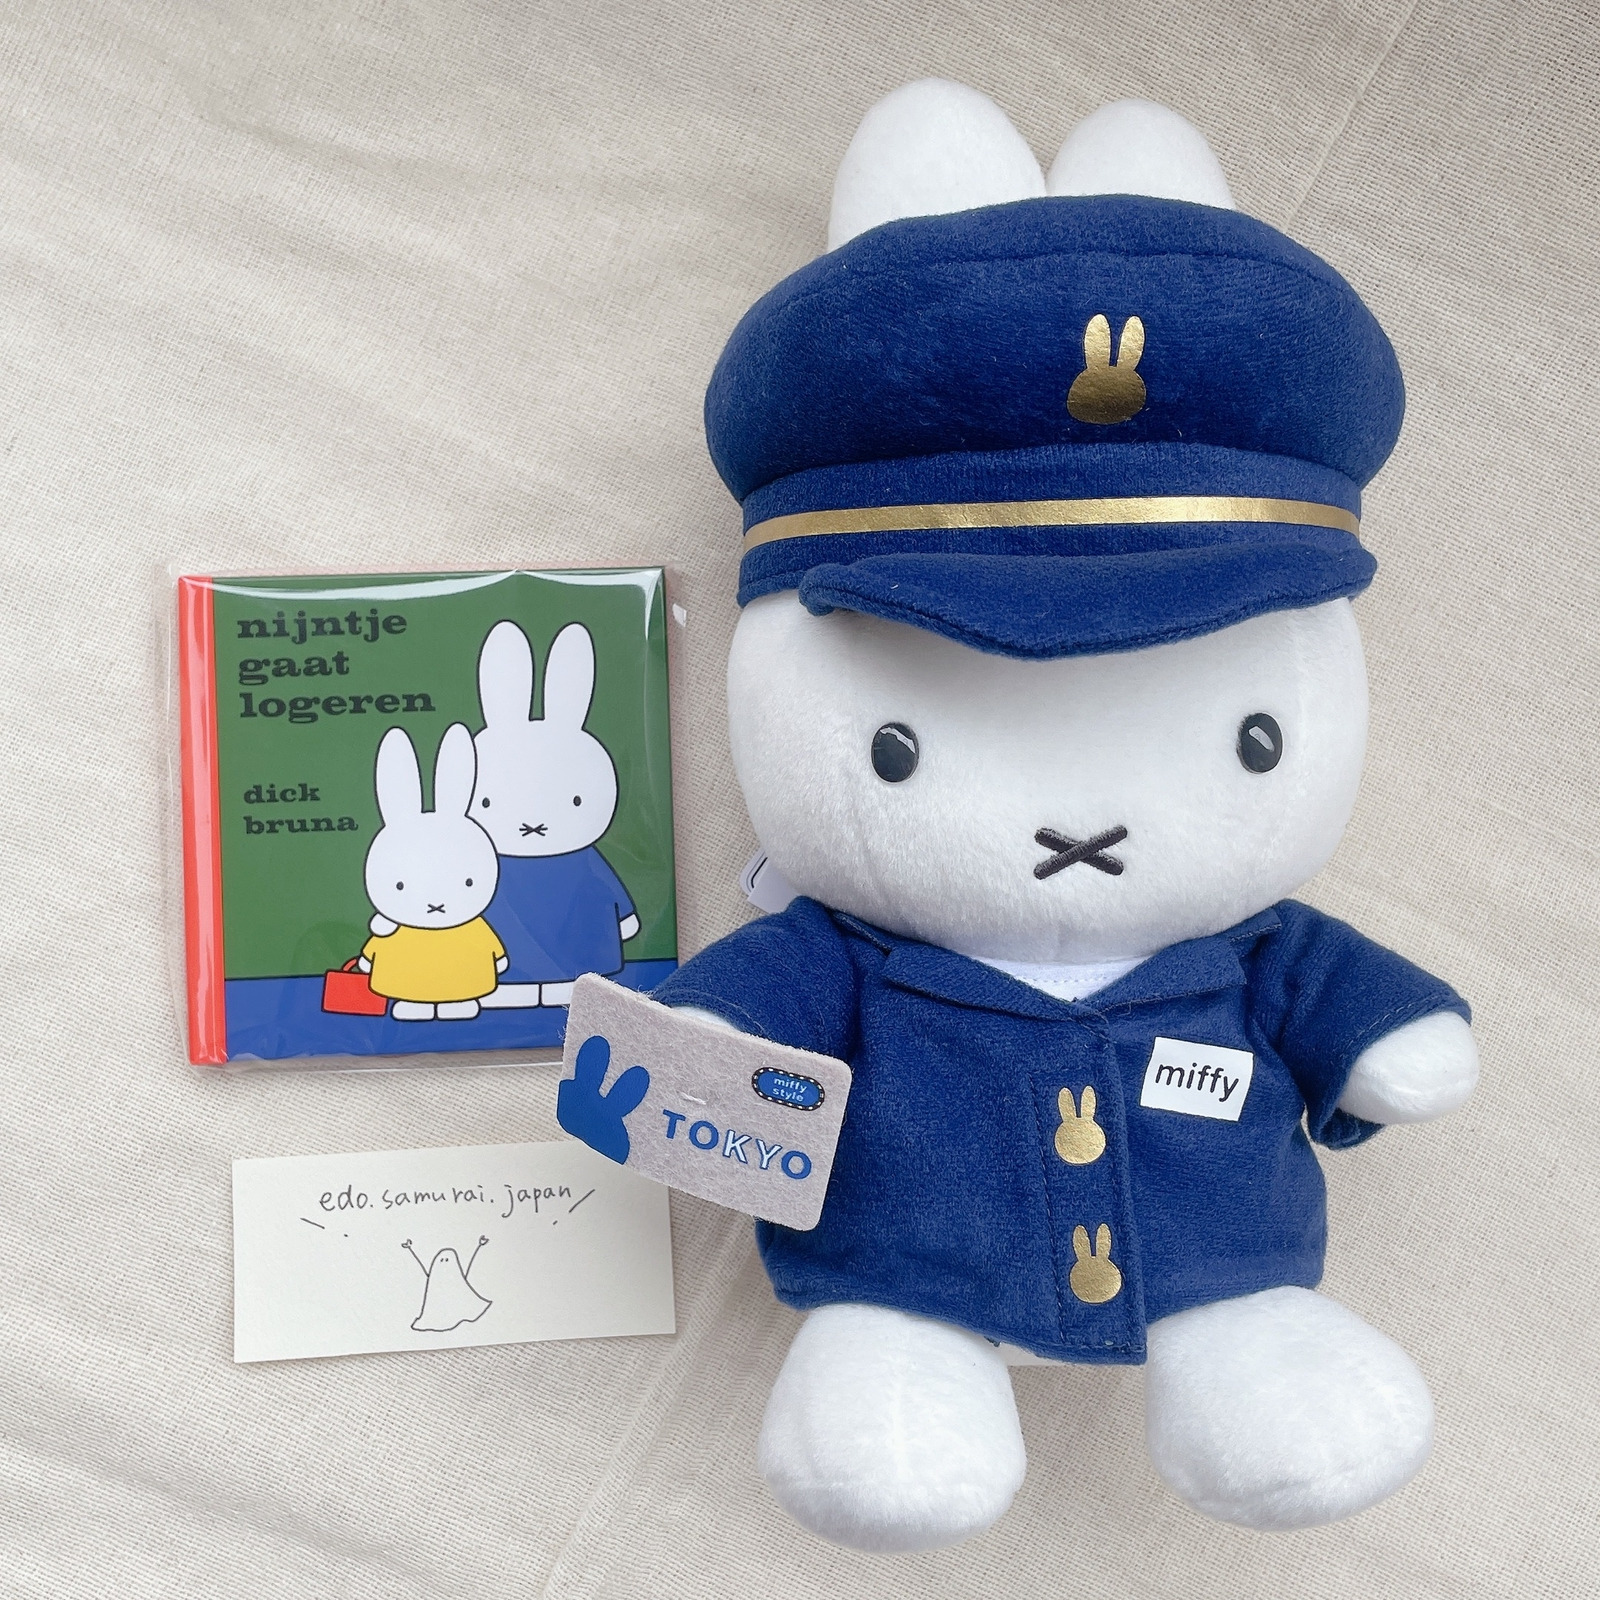 Miffy Station Master stuffed Tokyo Station Limited Dick Bruna with limited book